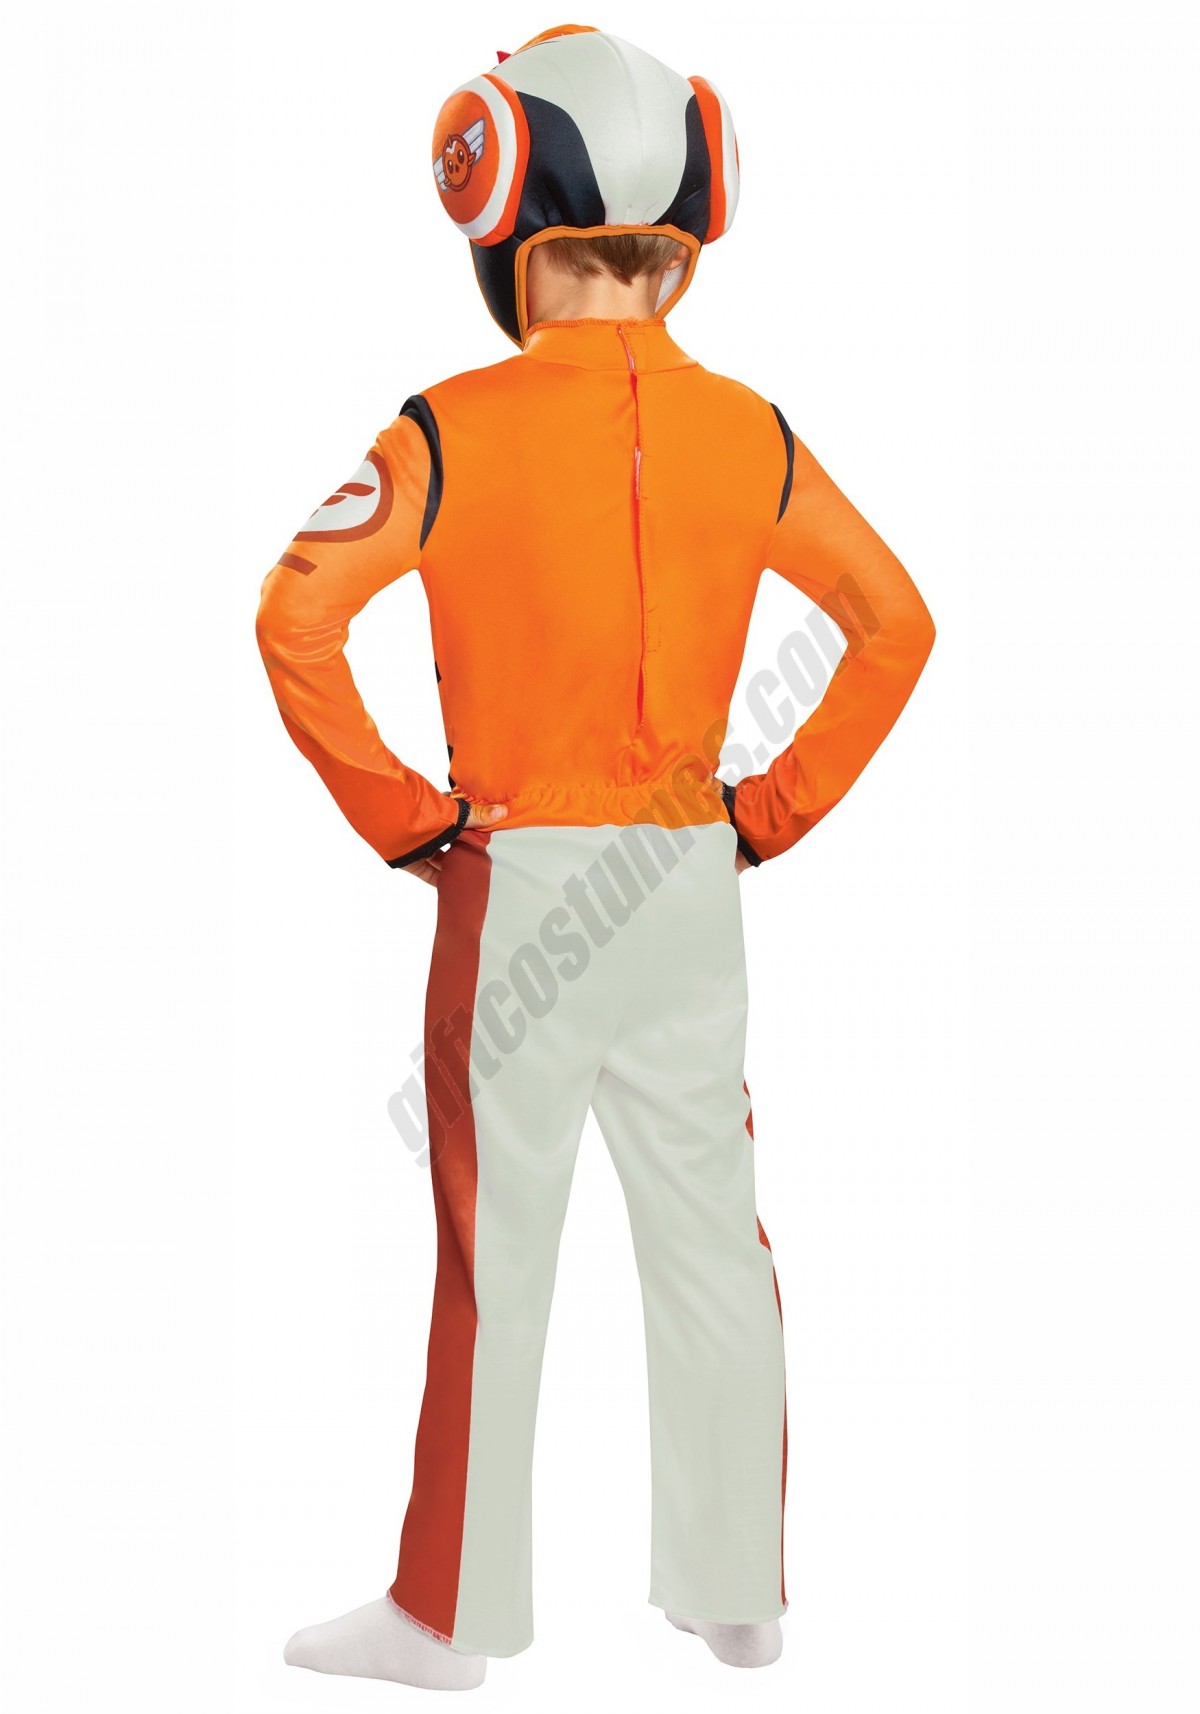 Top Wing Toddler Swift Classic Costume Promotions - -1